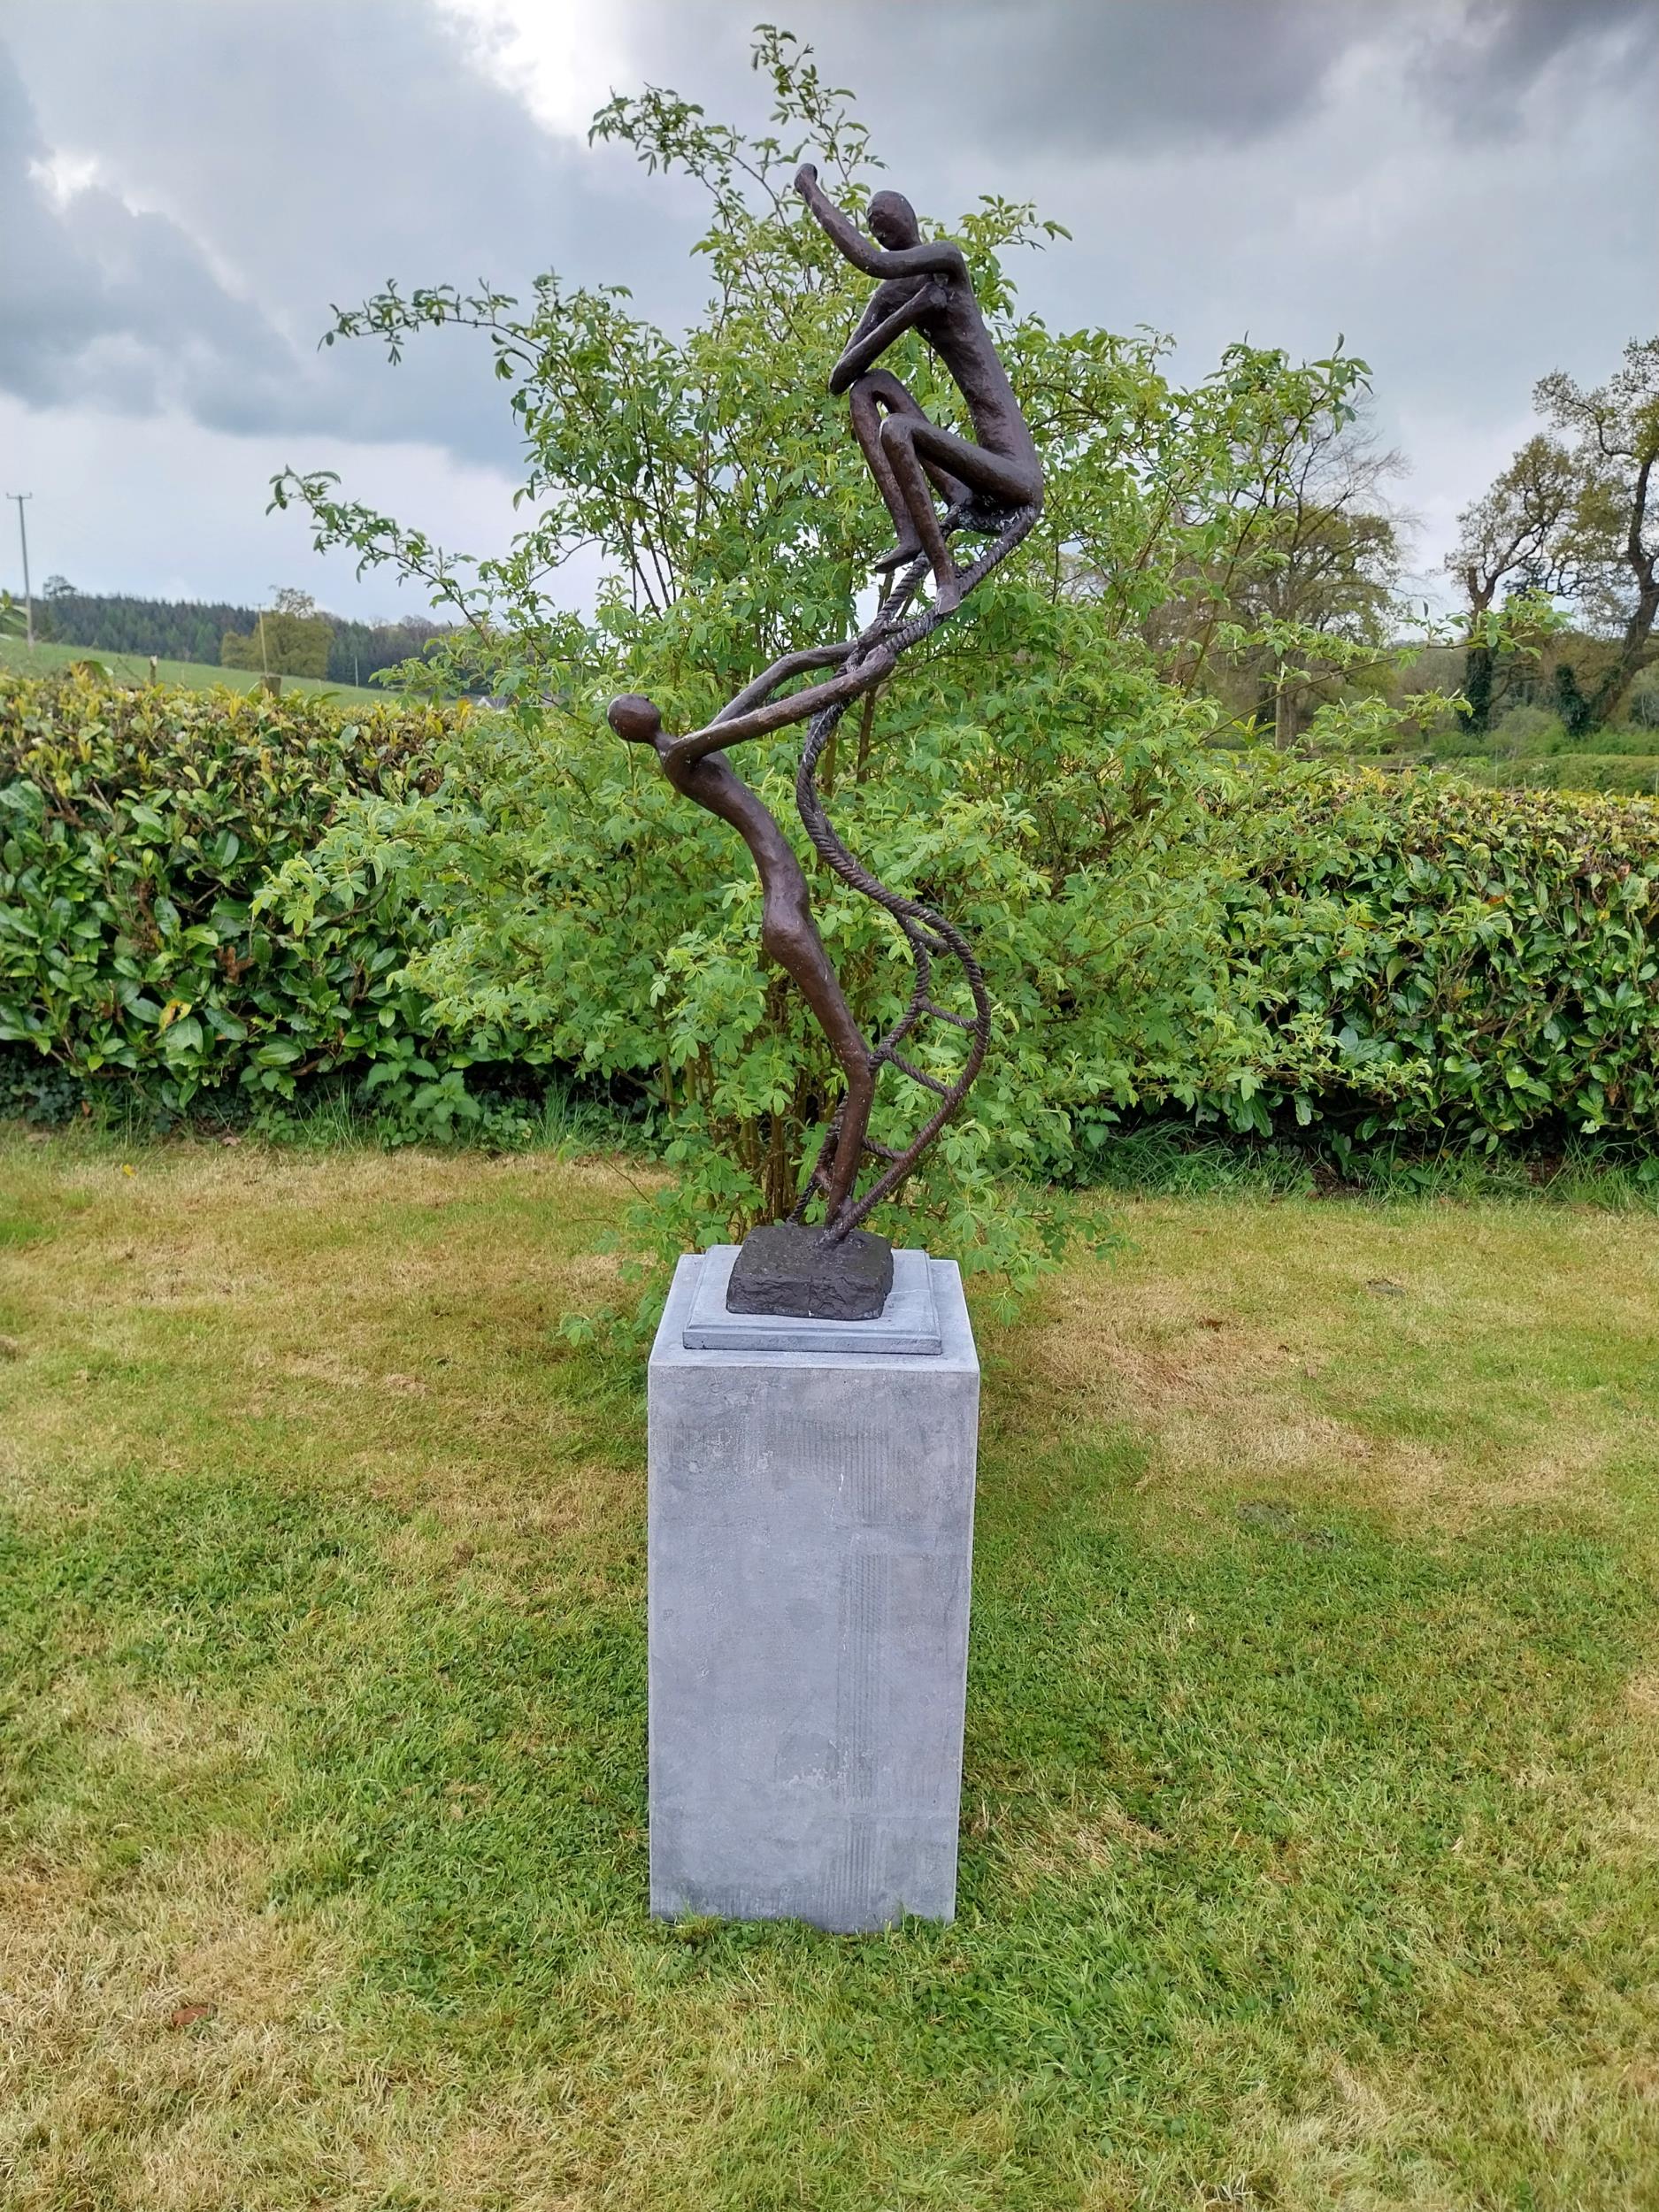 Exceptional quality contemporary bronze sculpture 'The Rope Climbing Acrobats' raised on slate - Image 2 of 7